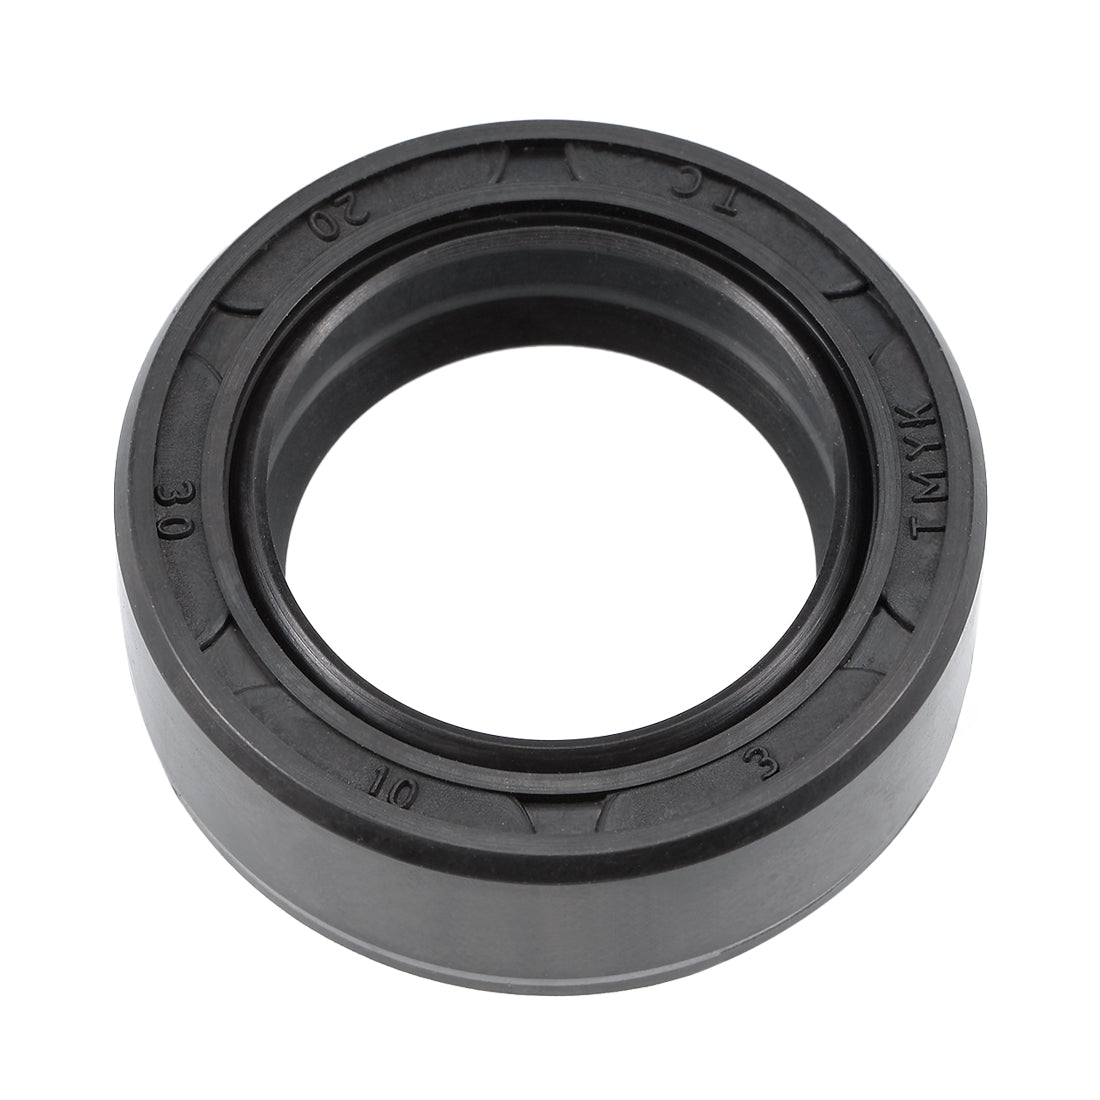 Uxcell Uxcell Oil Seal, TC 20mm x 34mm x 7mm, Nitrile Rubber Cover Double Lip